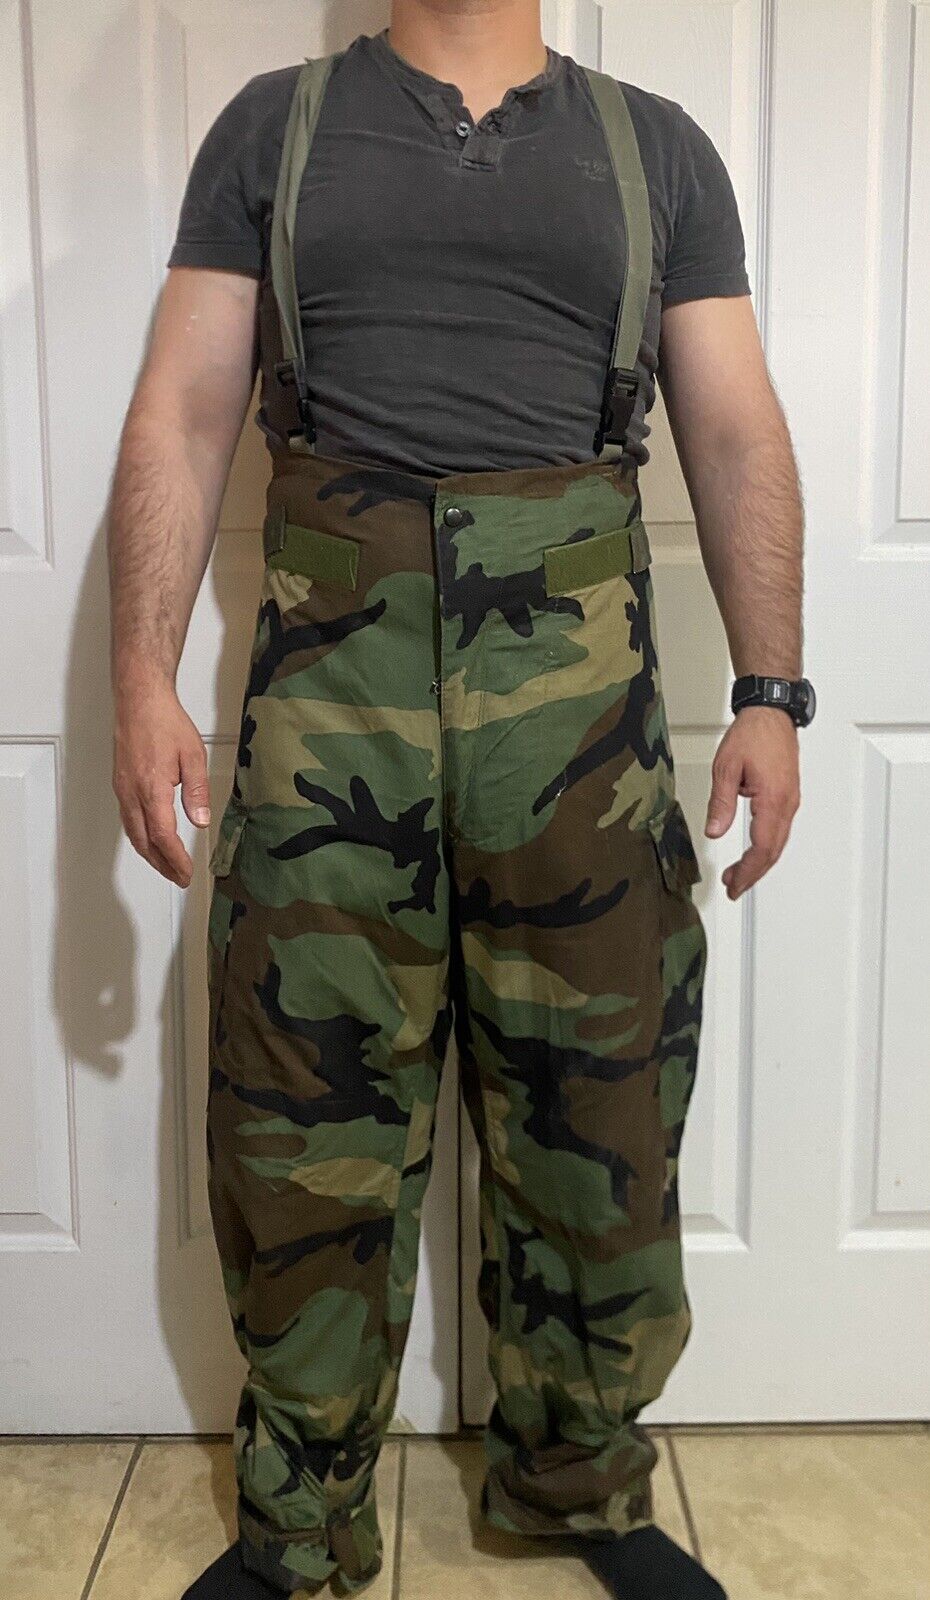 U.S. Military Chemical Protective Suit Trousers -Woodland Camo, Size Medium Larg